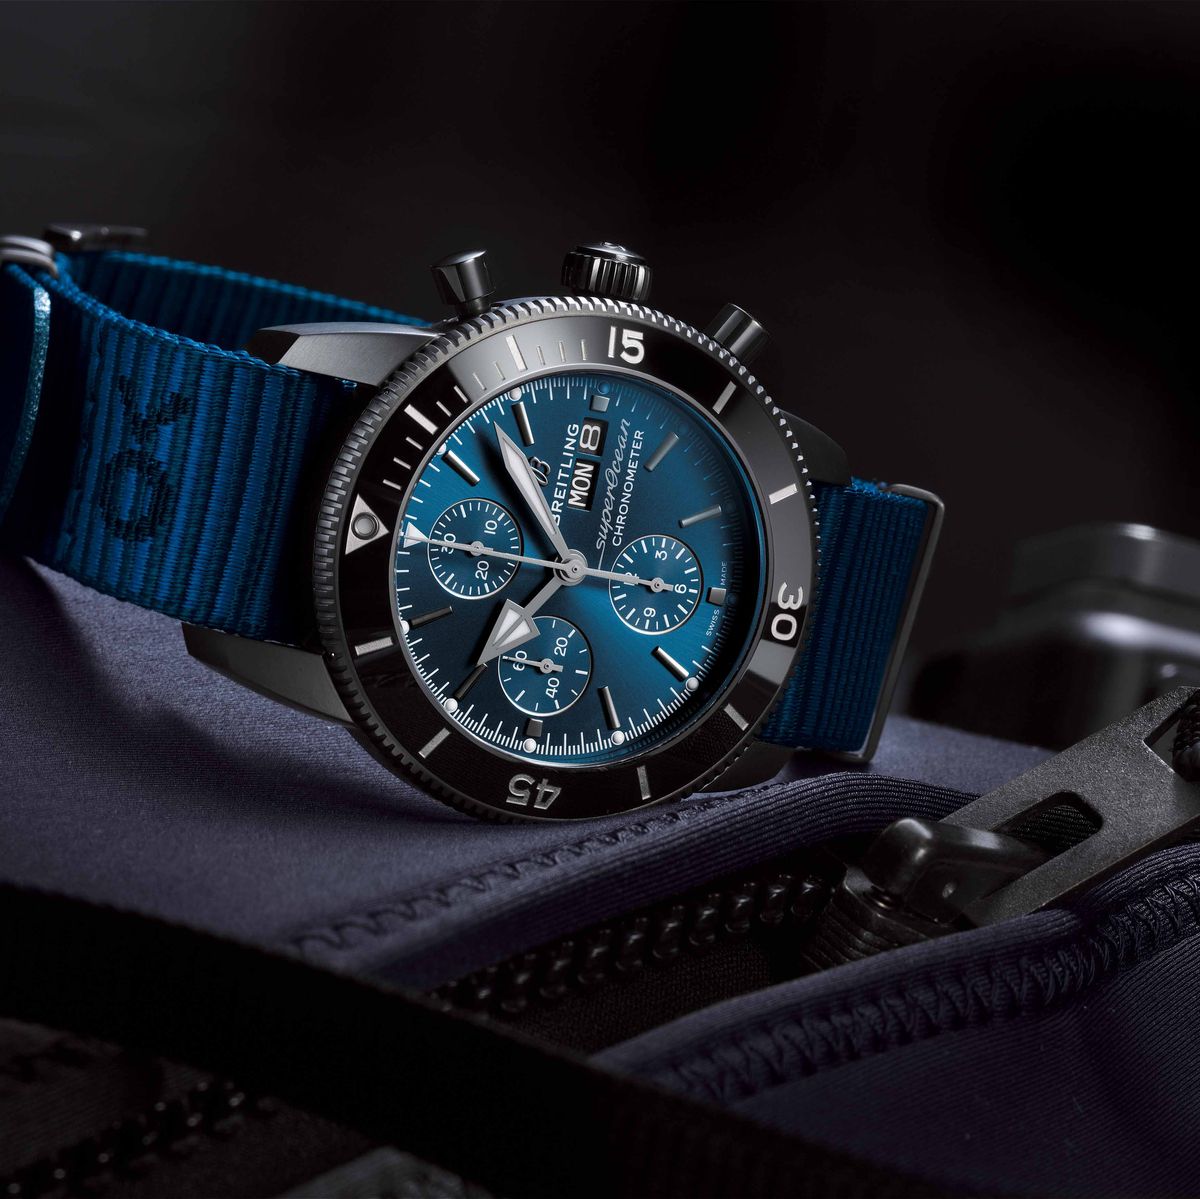 Superocean Heritage II Chronograph 44 Outerknown Watch Review 2018